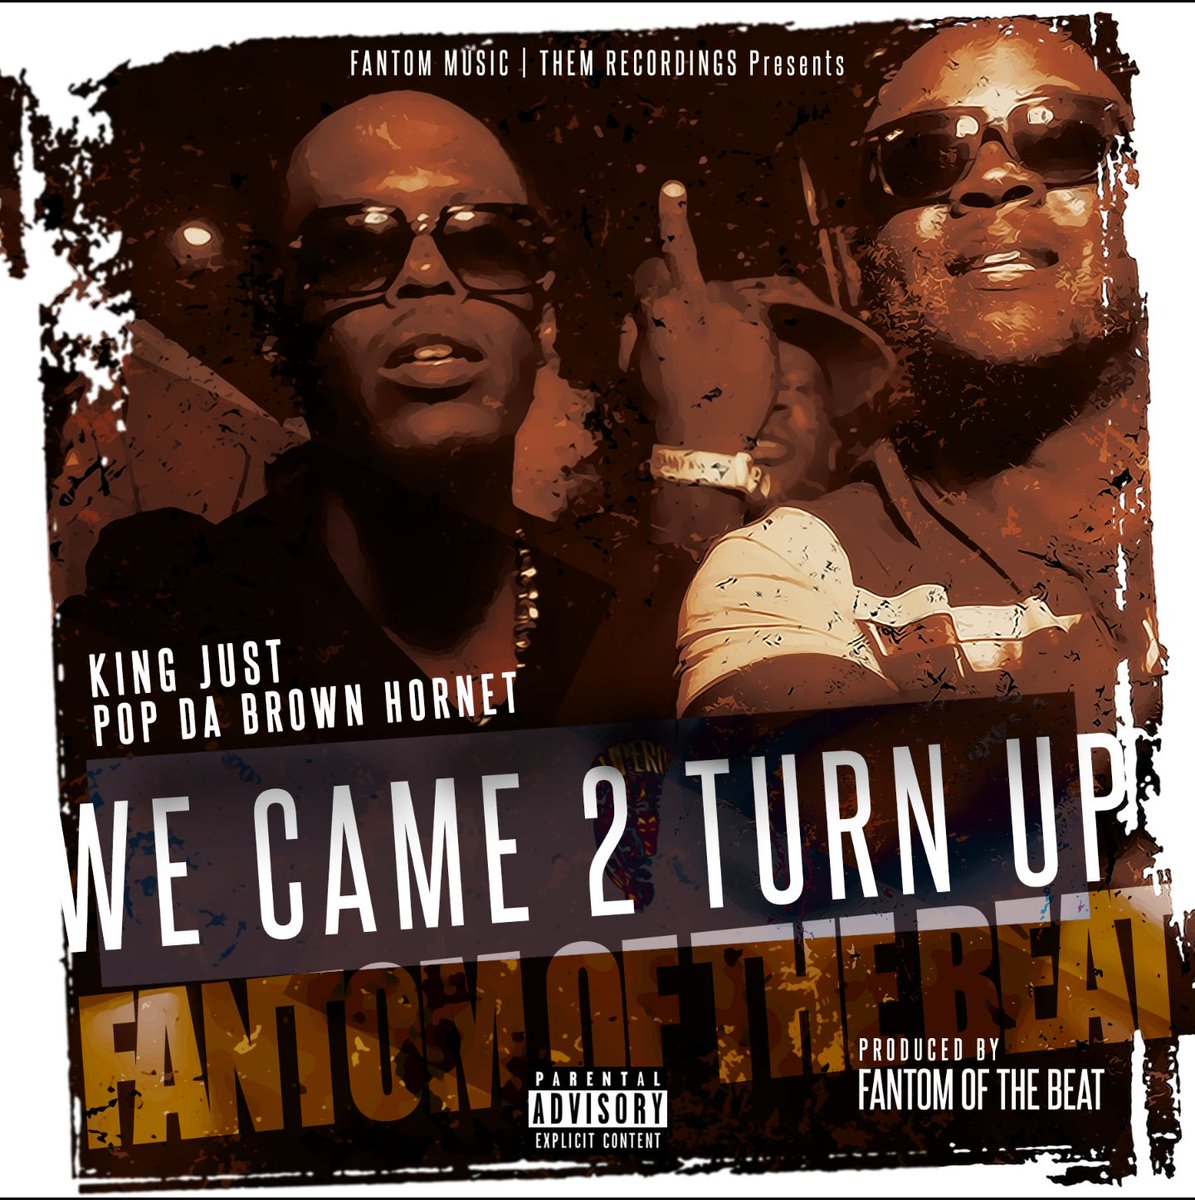 🚨🚨🚨NEW SINGLE ALERT🚨🚨🚨WHATSUP MY TWITTER,POP DA BROWN HORNET AND KING JUST ARE BACK AT IT WITH A BRAND NEW SINGLE PRODUCED BY FANTOM OF THE BEATS,TITLED 'WE CAME HERE 2 TURN UP ' ON SONY RED, AVAILABLE NOW ON #SPODIFY #ITUNES #AMAZON #DEEZER 💣🅰🔥